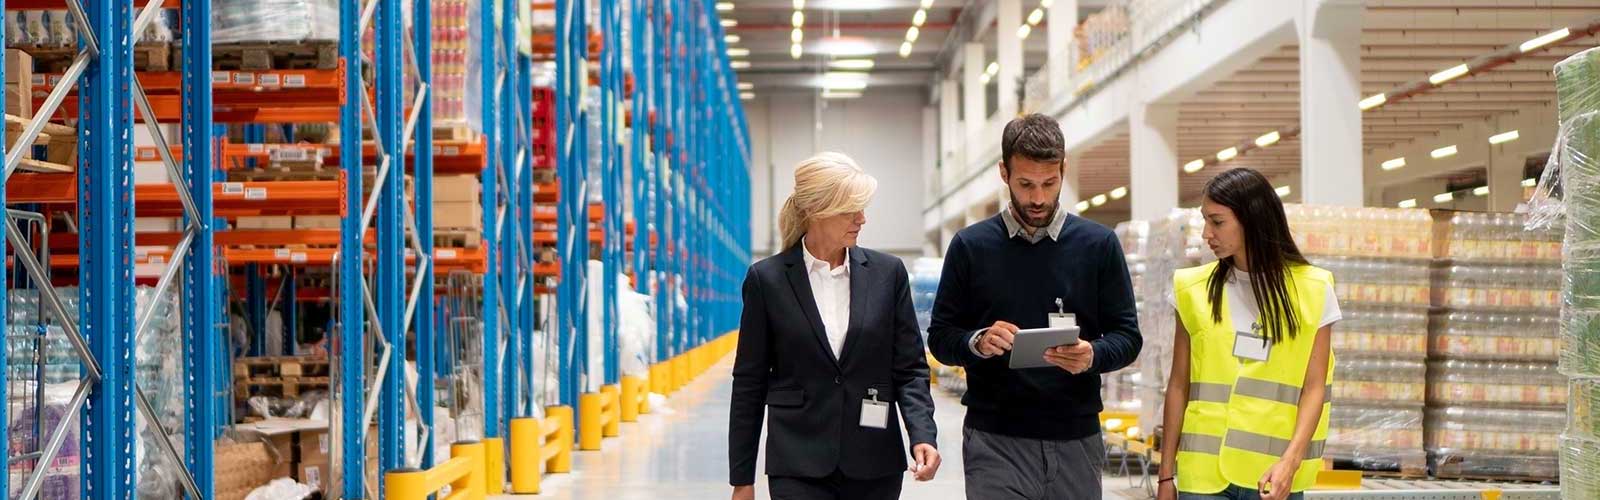 Warehouse employees using a custom warehouse management system